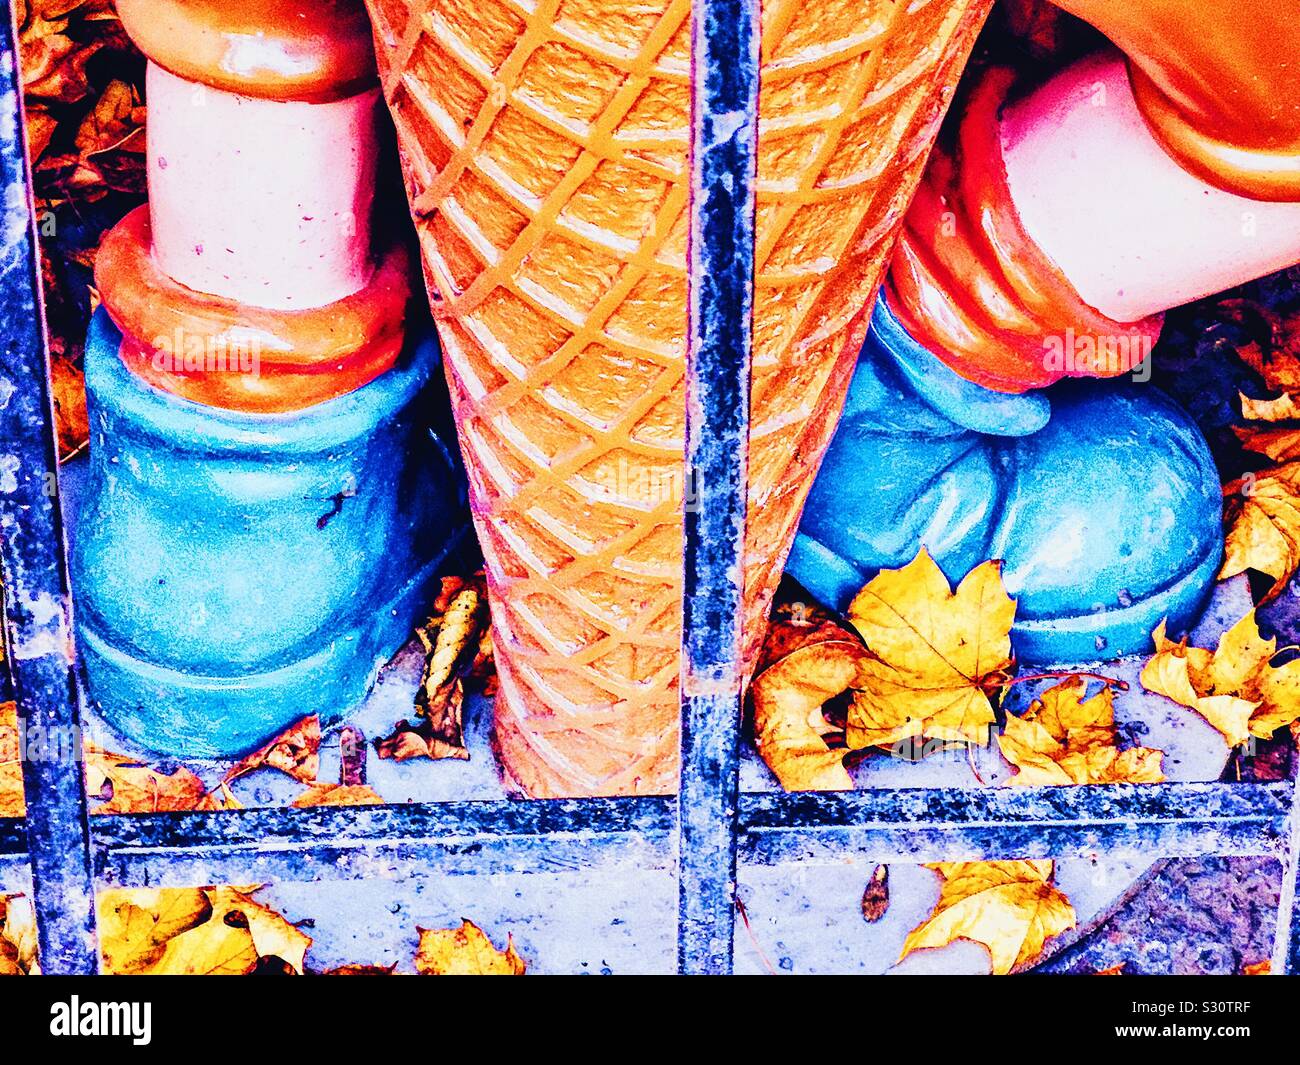 Blue boots and giant plastic icecream amongst autumn leaves in storage for winter, Sweden Stock Photo